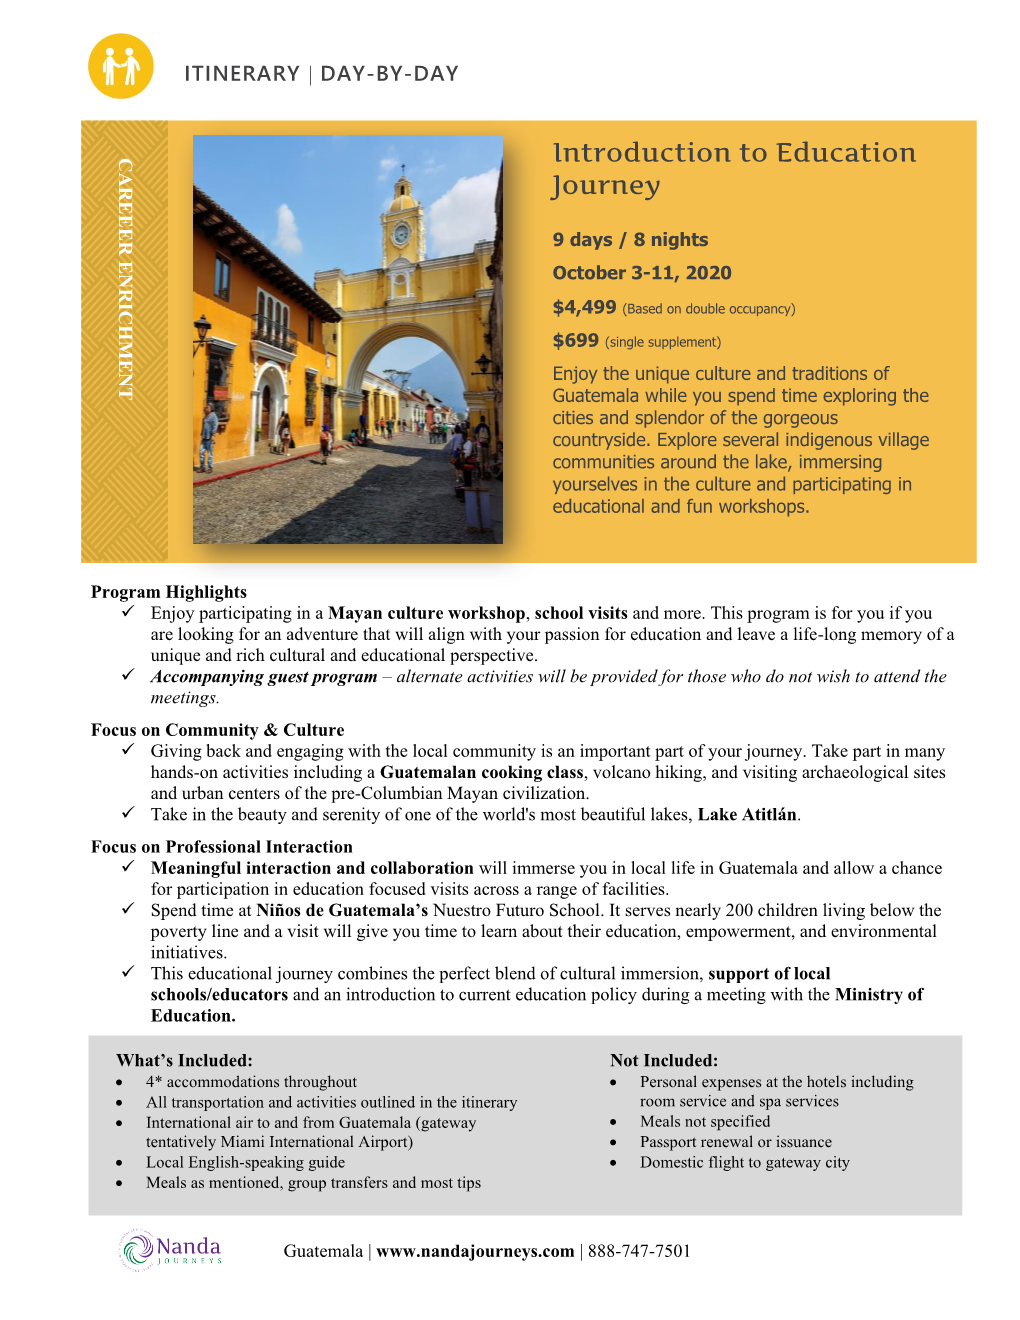 Introduction to Education Journey to Guatemala 9 Days / 8 Nights October 3-11, 2020